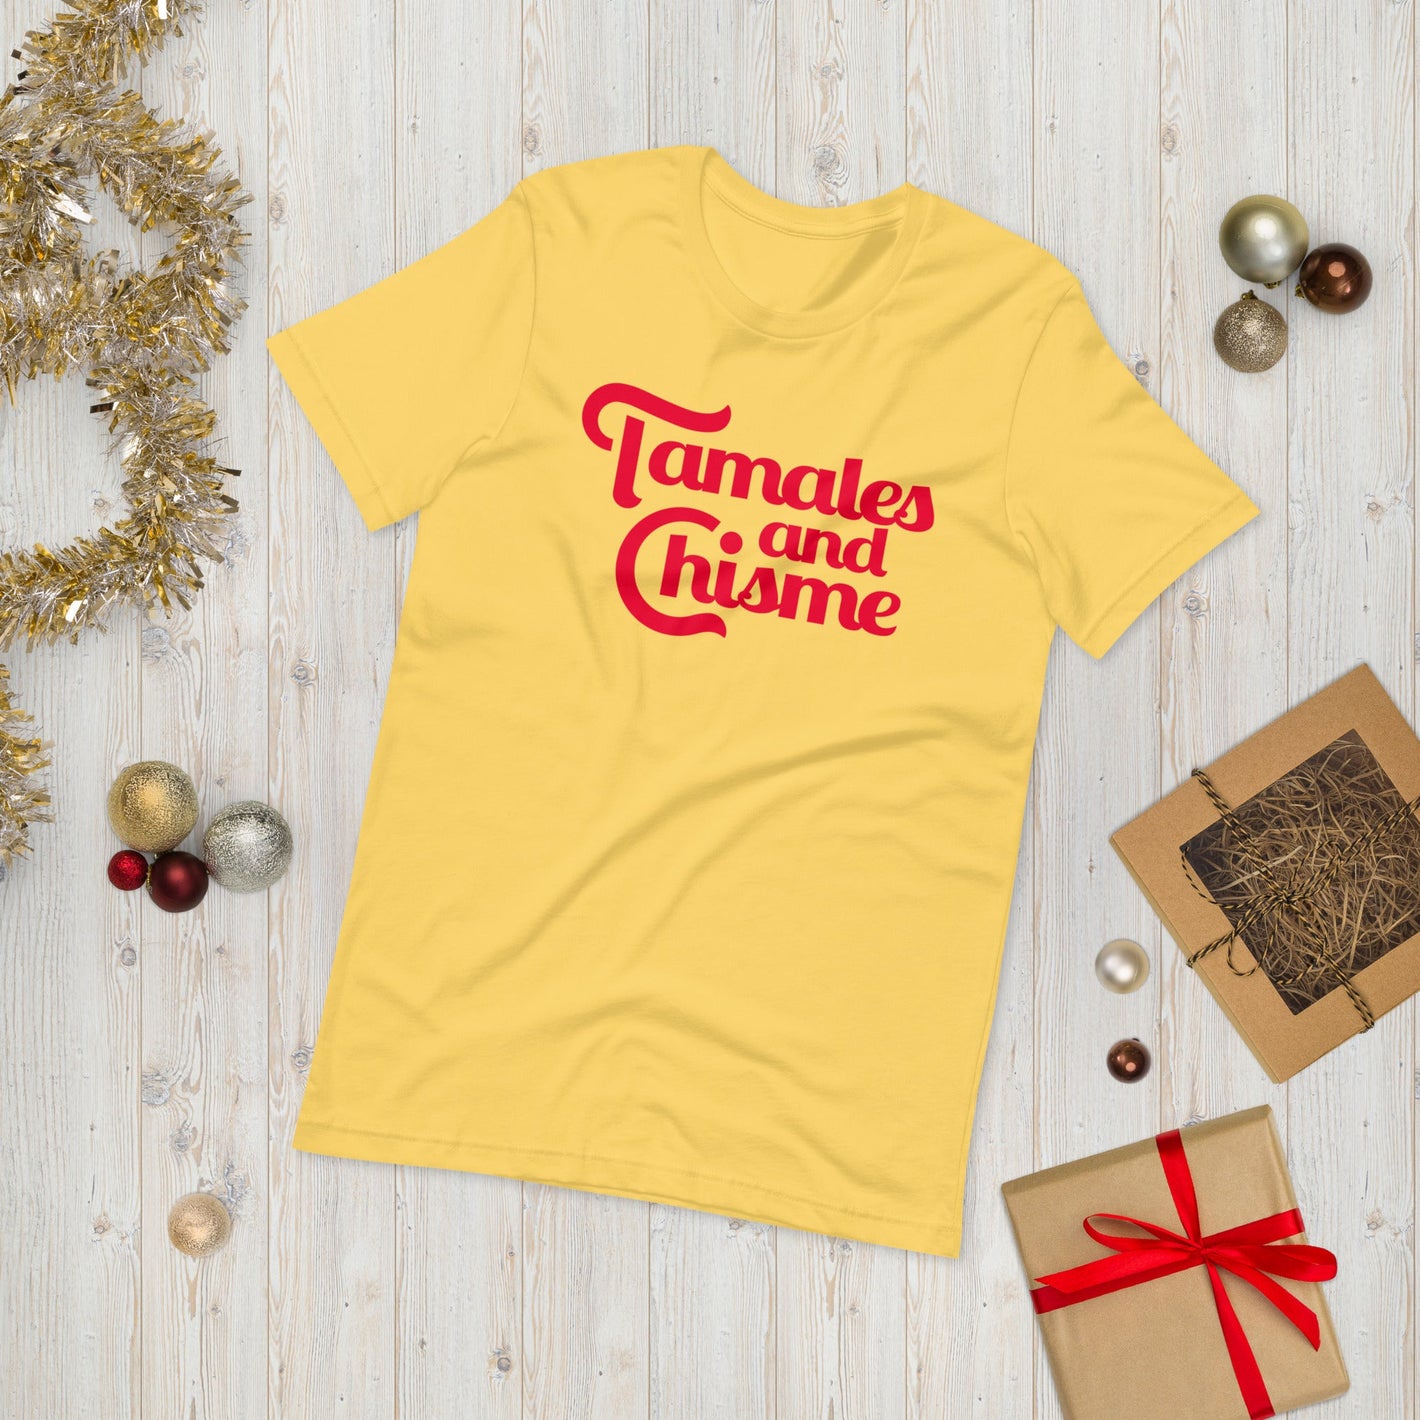 Tamales and Chisme T-Shirt